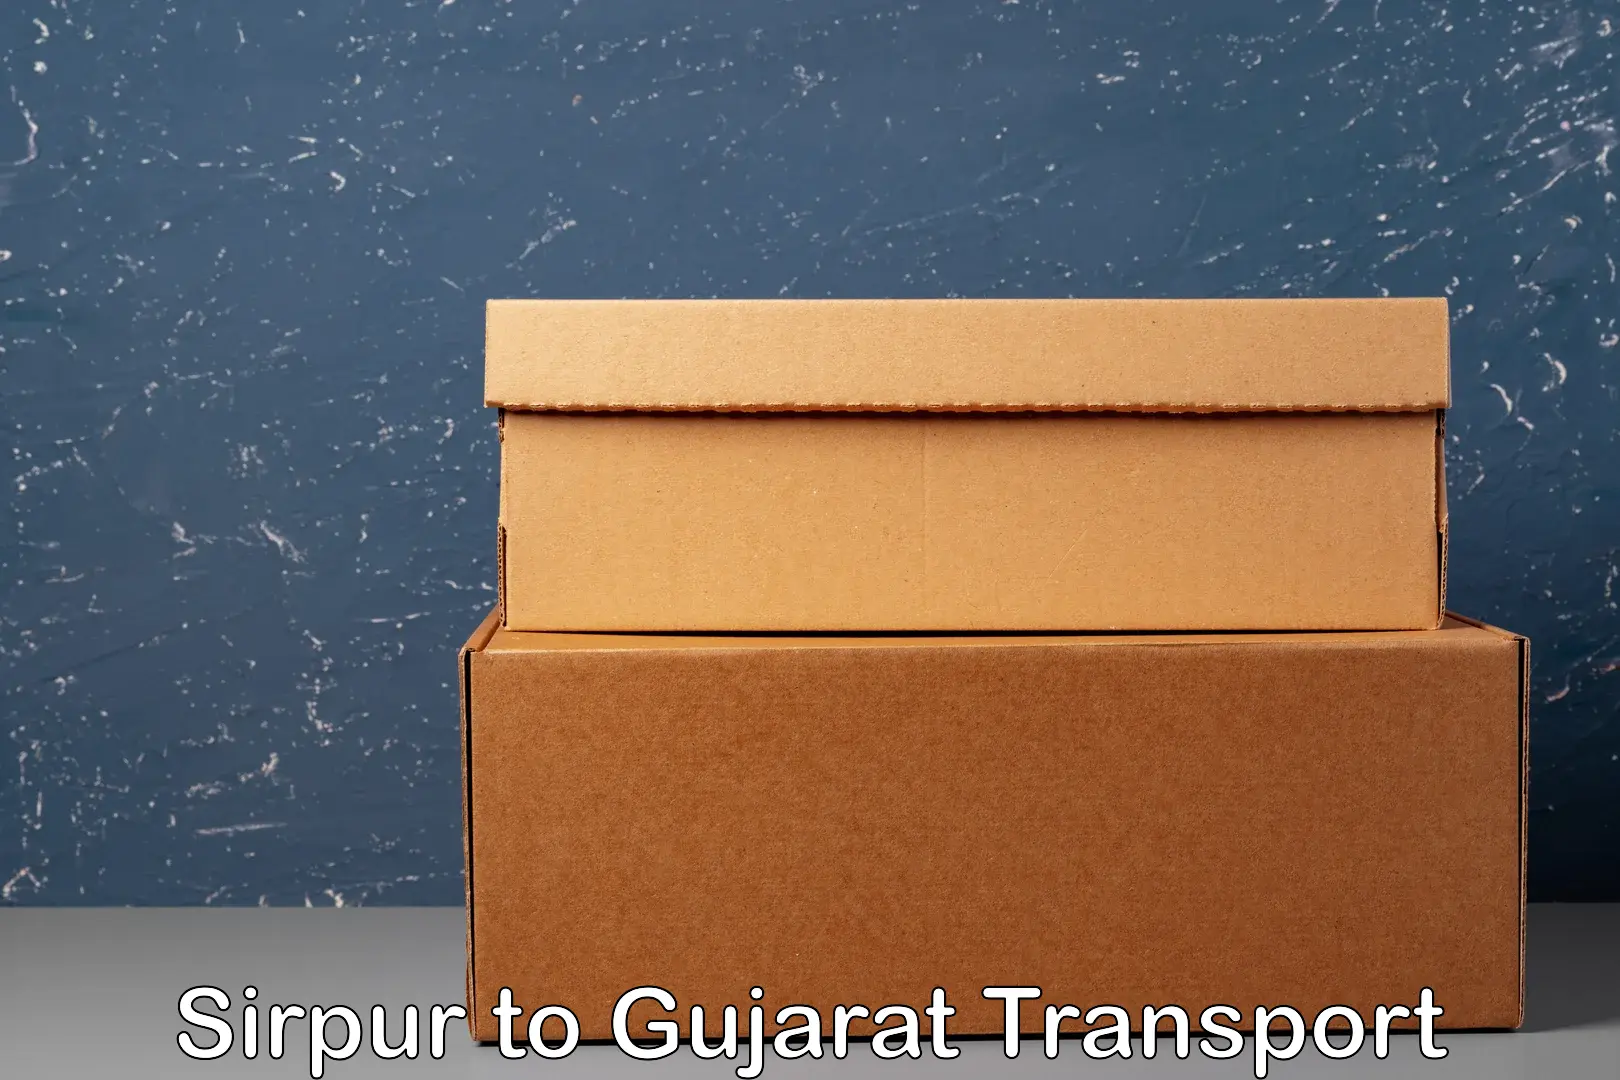 Commercial transport service Sirpur to Gujarat